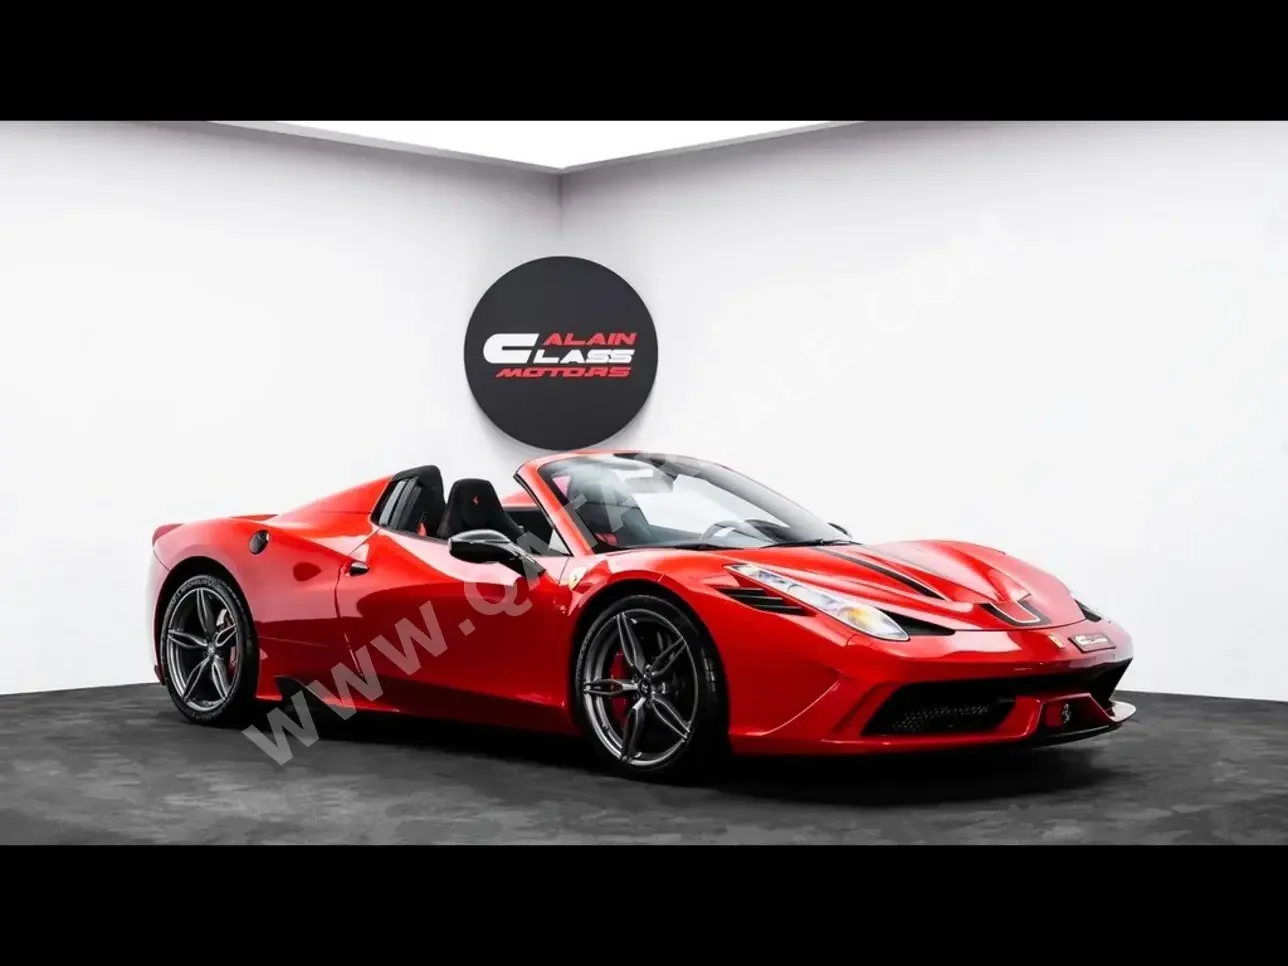 Ferrari  458  2015  Automatic  3,239 Km  8 Cylinder  Rear Wheel Drive (RWD)  Coupe / Sport  Red  With Warranty